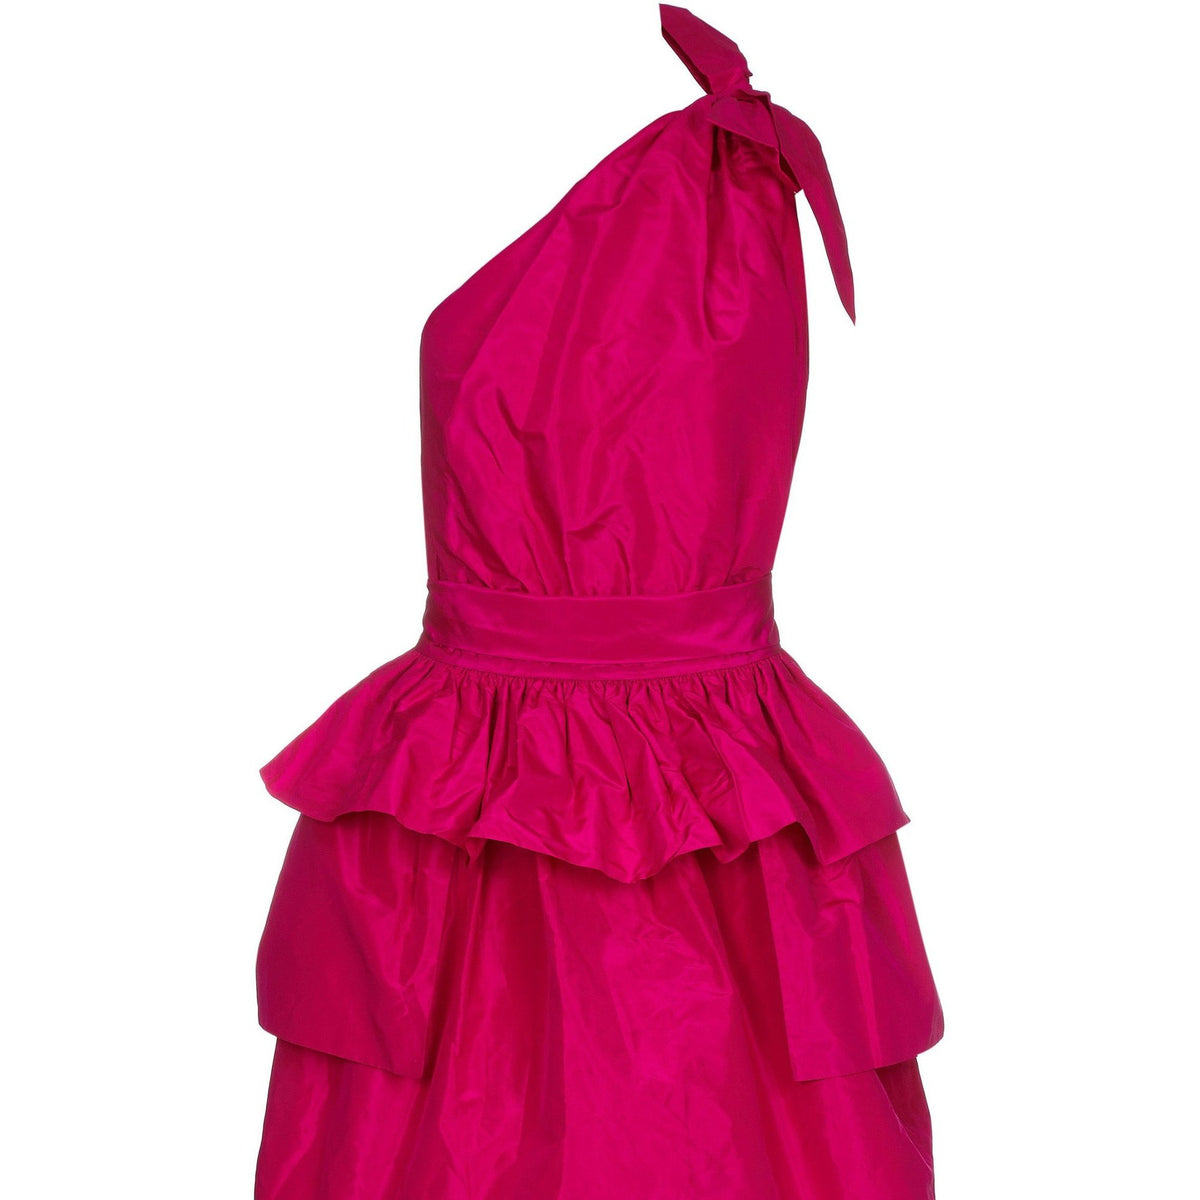 ARCHIVE: 1980s Hot Pink Lanvin One Shoulder Dress With Peplum